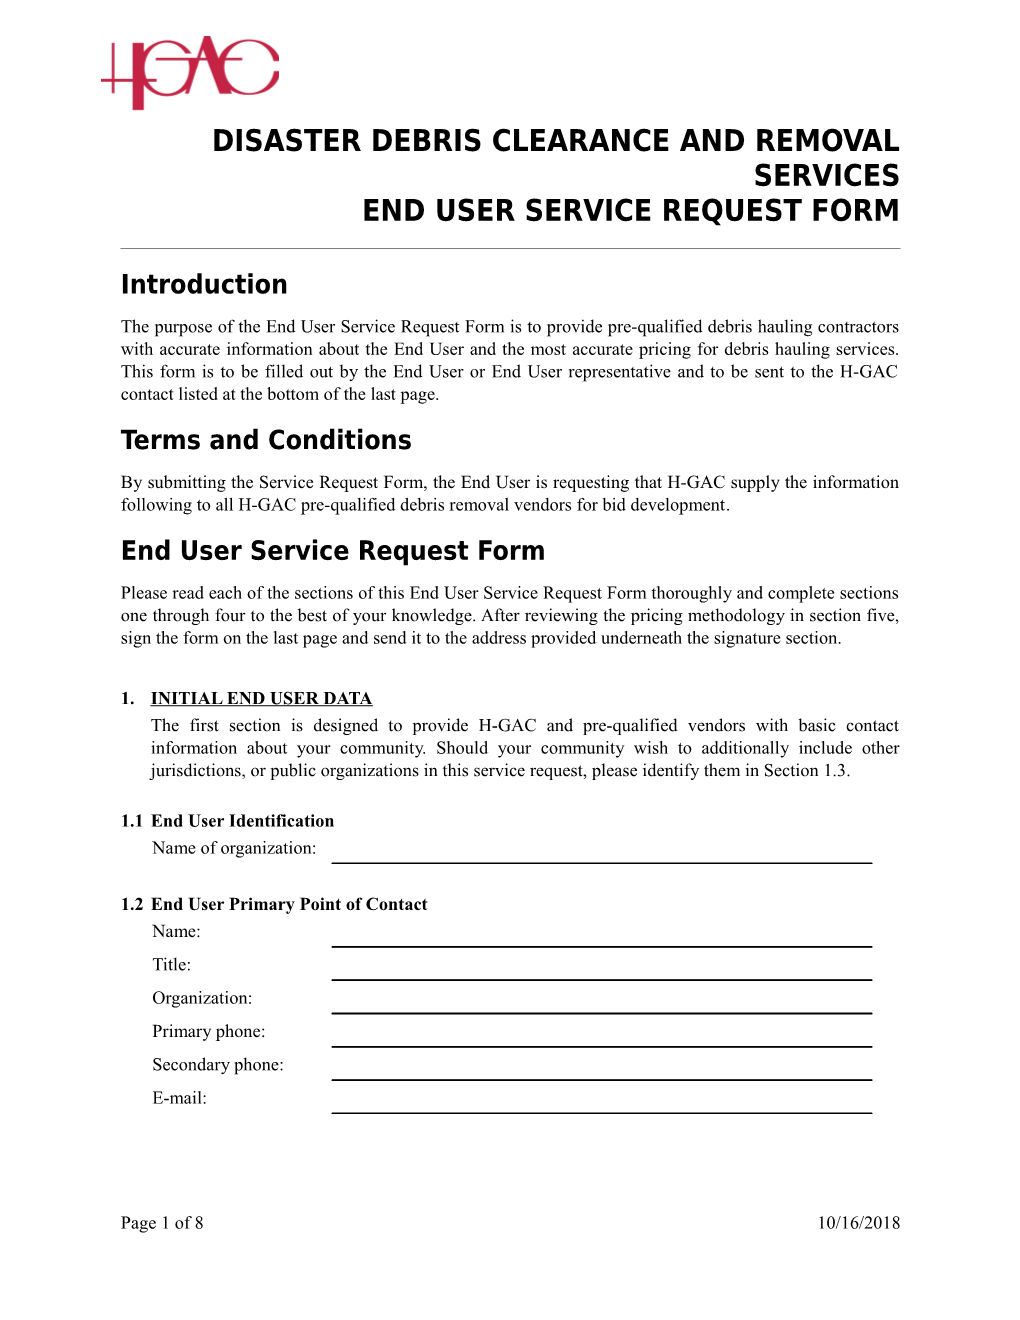 End User Service Request Form